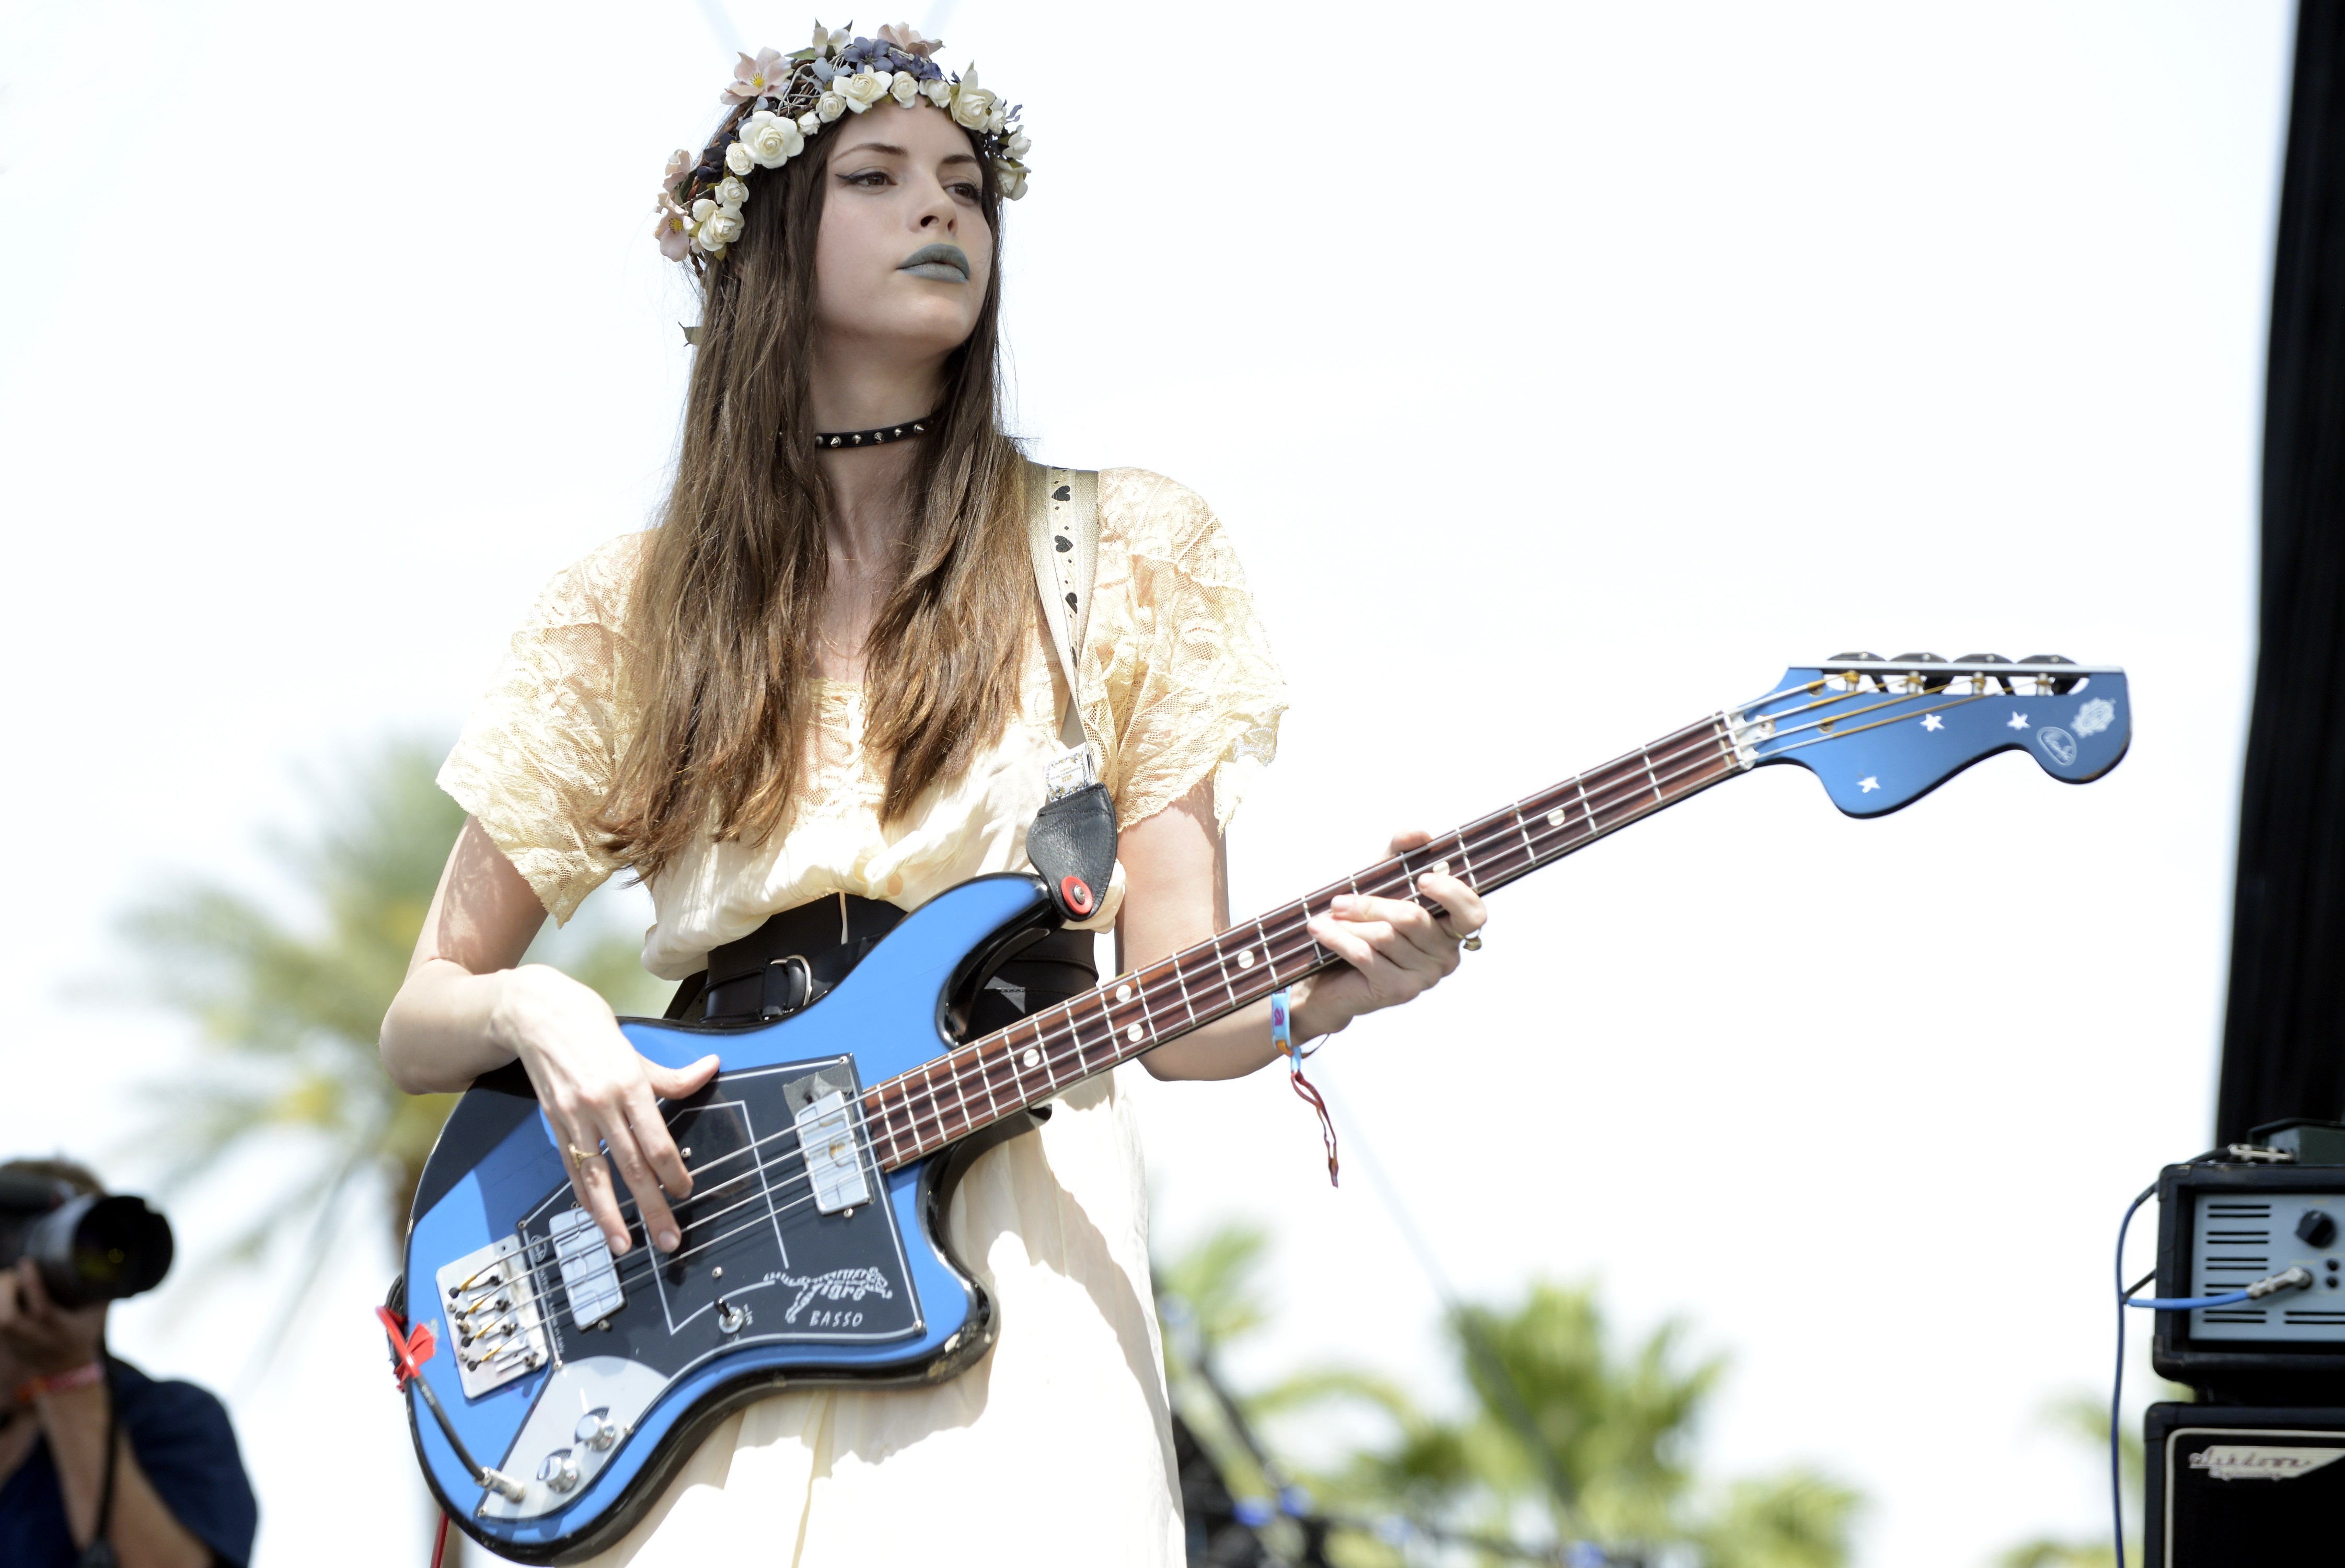 Charlotte Kemp Muhl performs during the Coachella Valley Music and Arts Festival